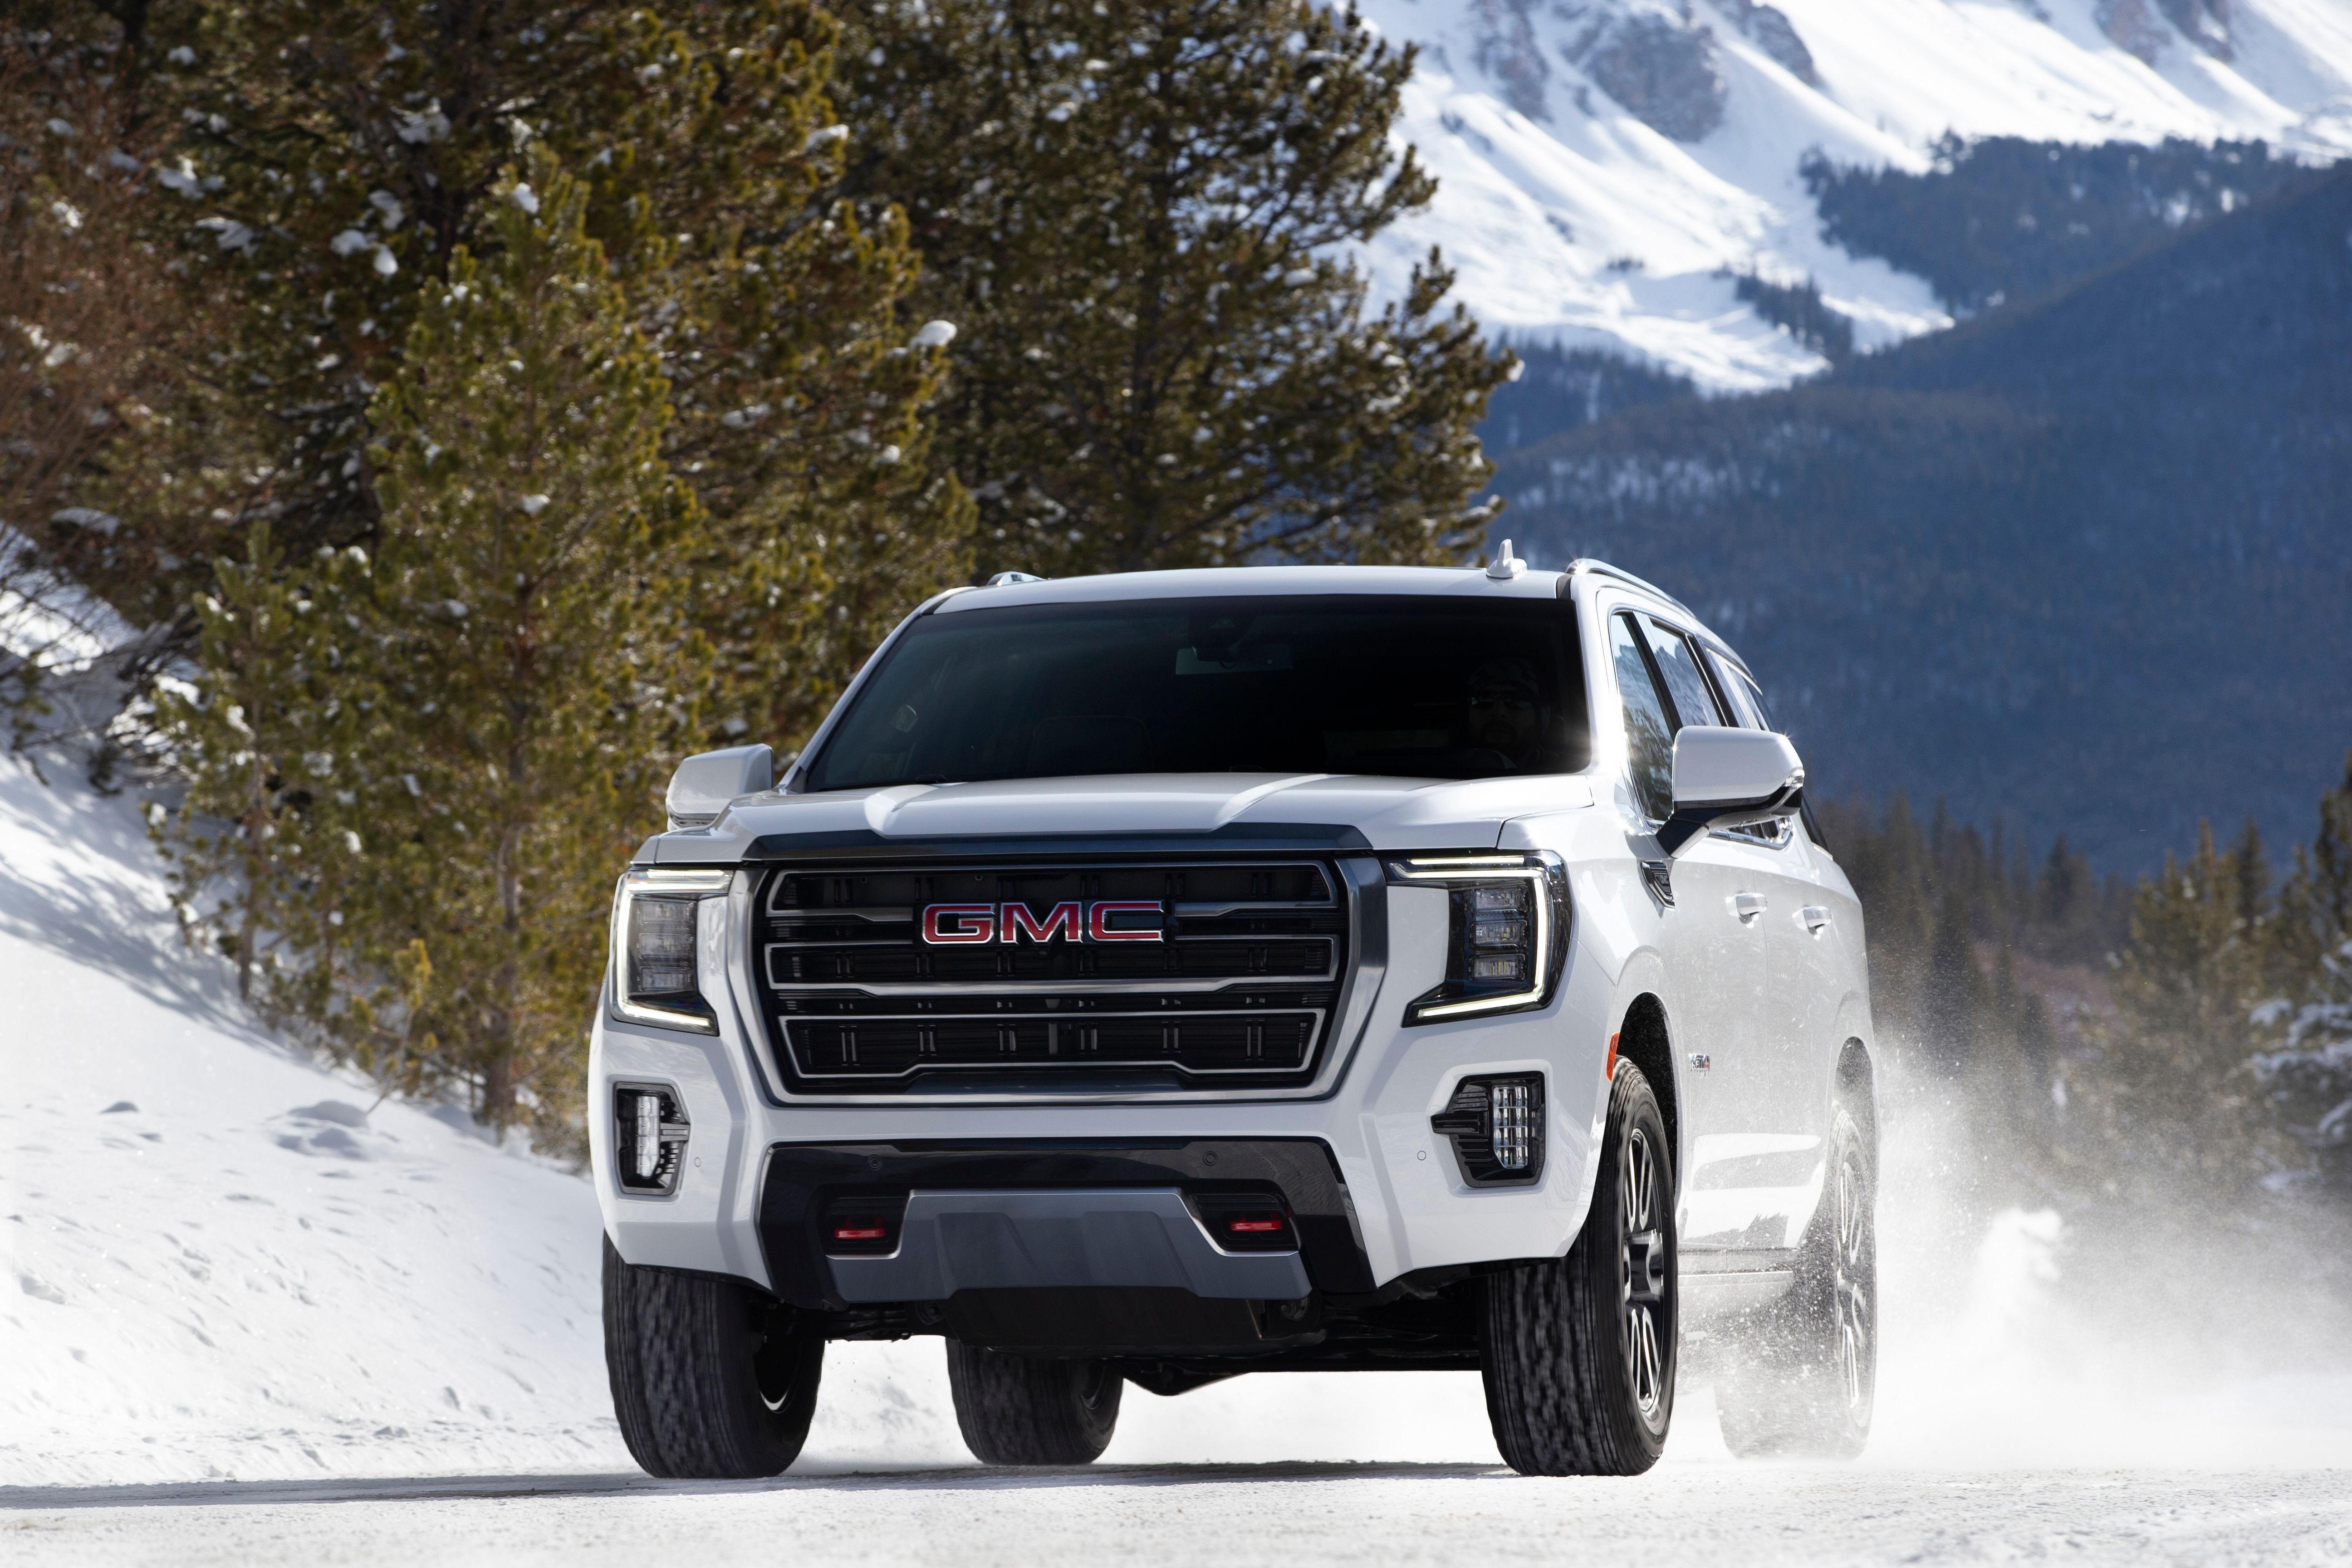 2020 Rivian Has Found An Unlikely Competitor For Its Tank Turn Feature In The GMC Yukon